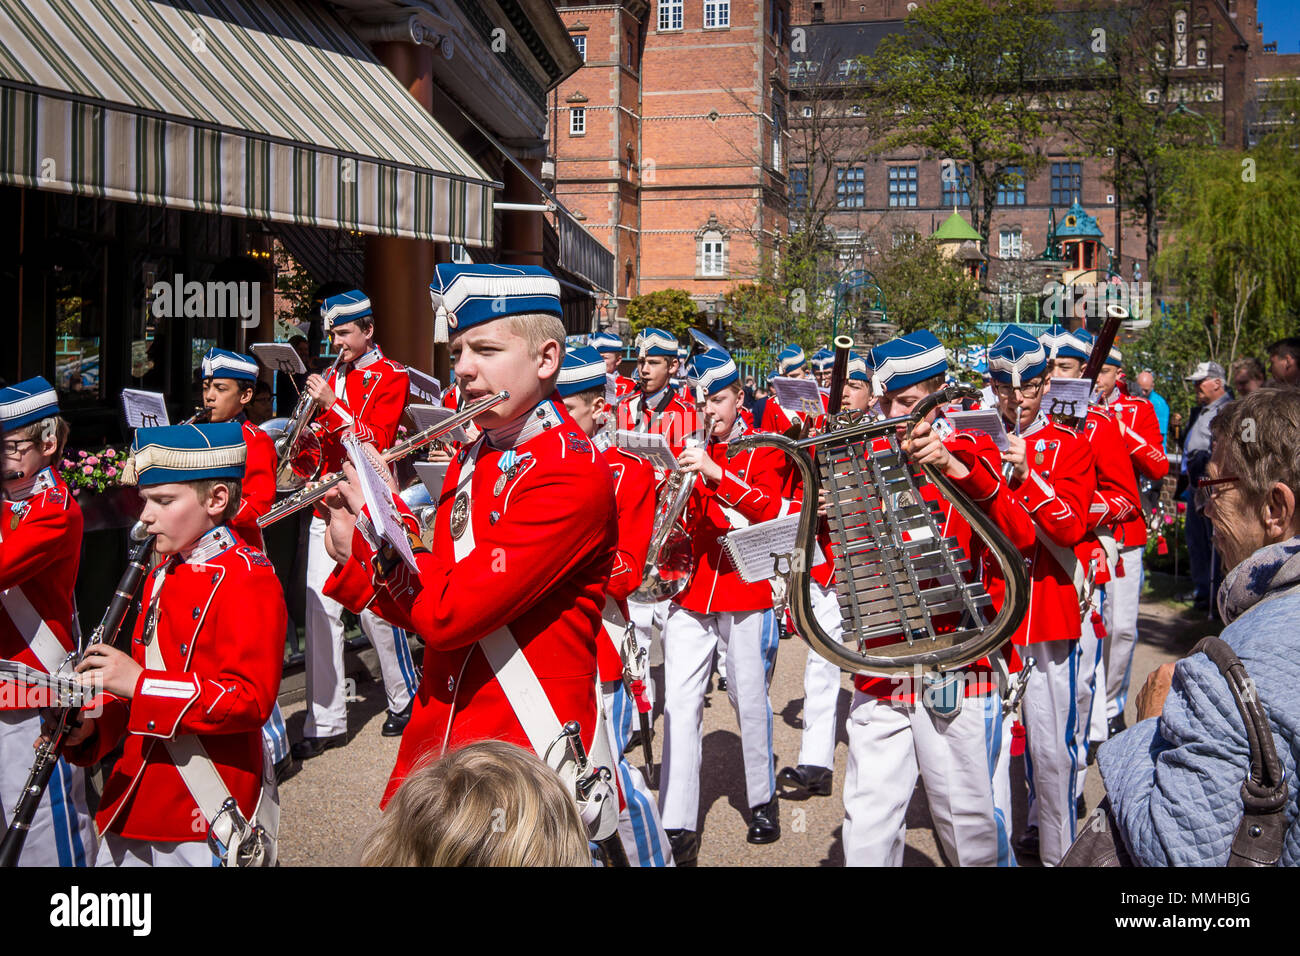 The Tivoli Youth Guard Band in red jacket and white trousers, May 5, 2018, Copenhagen, Denmark Stock Photo